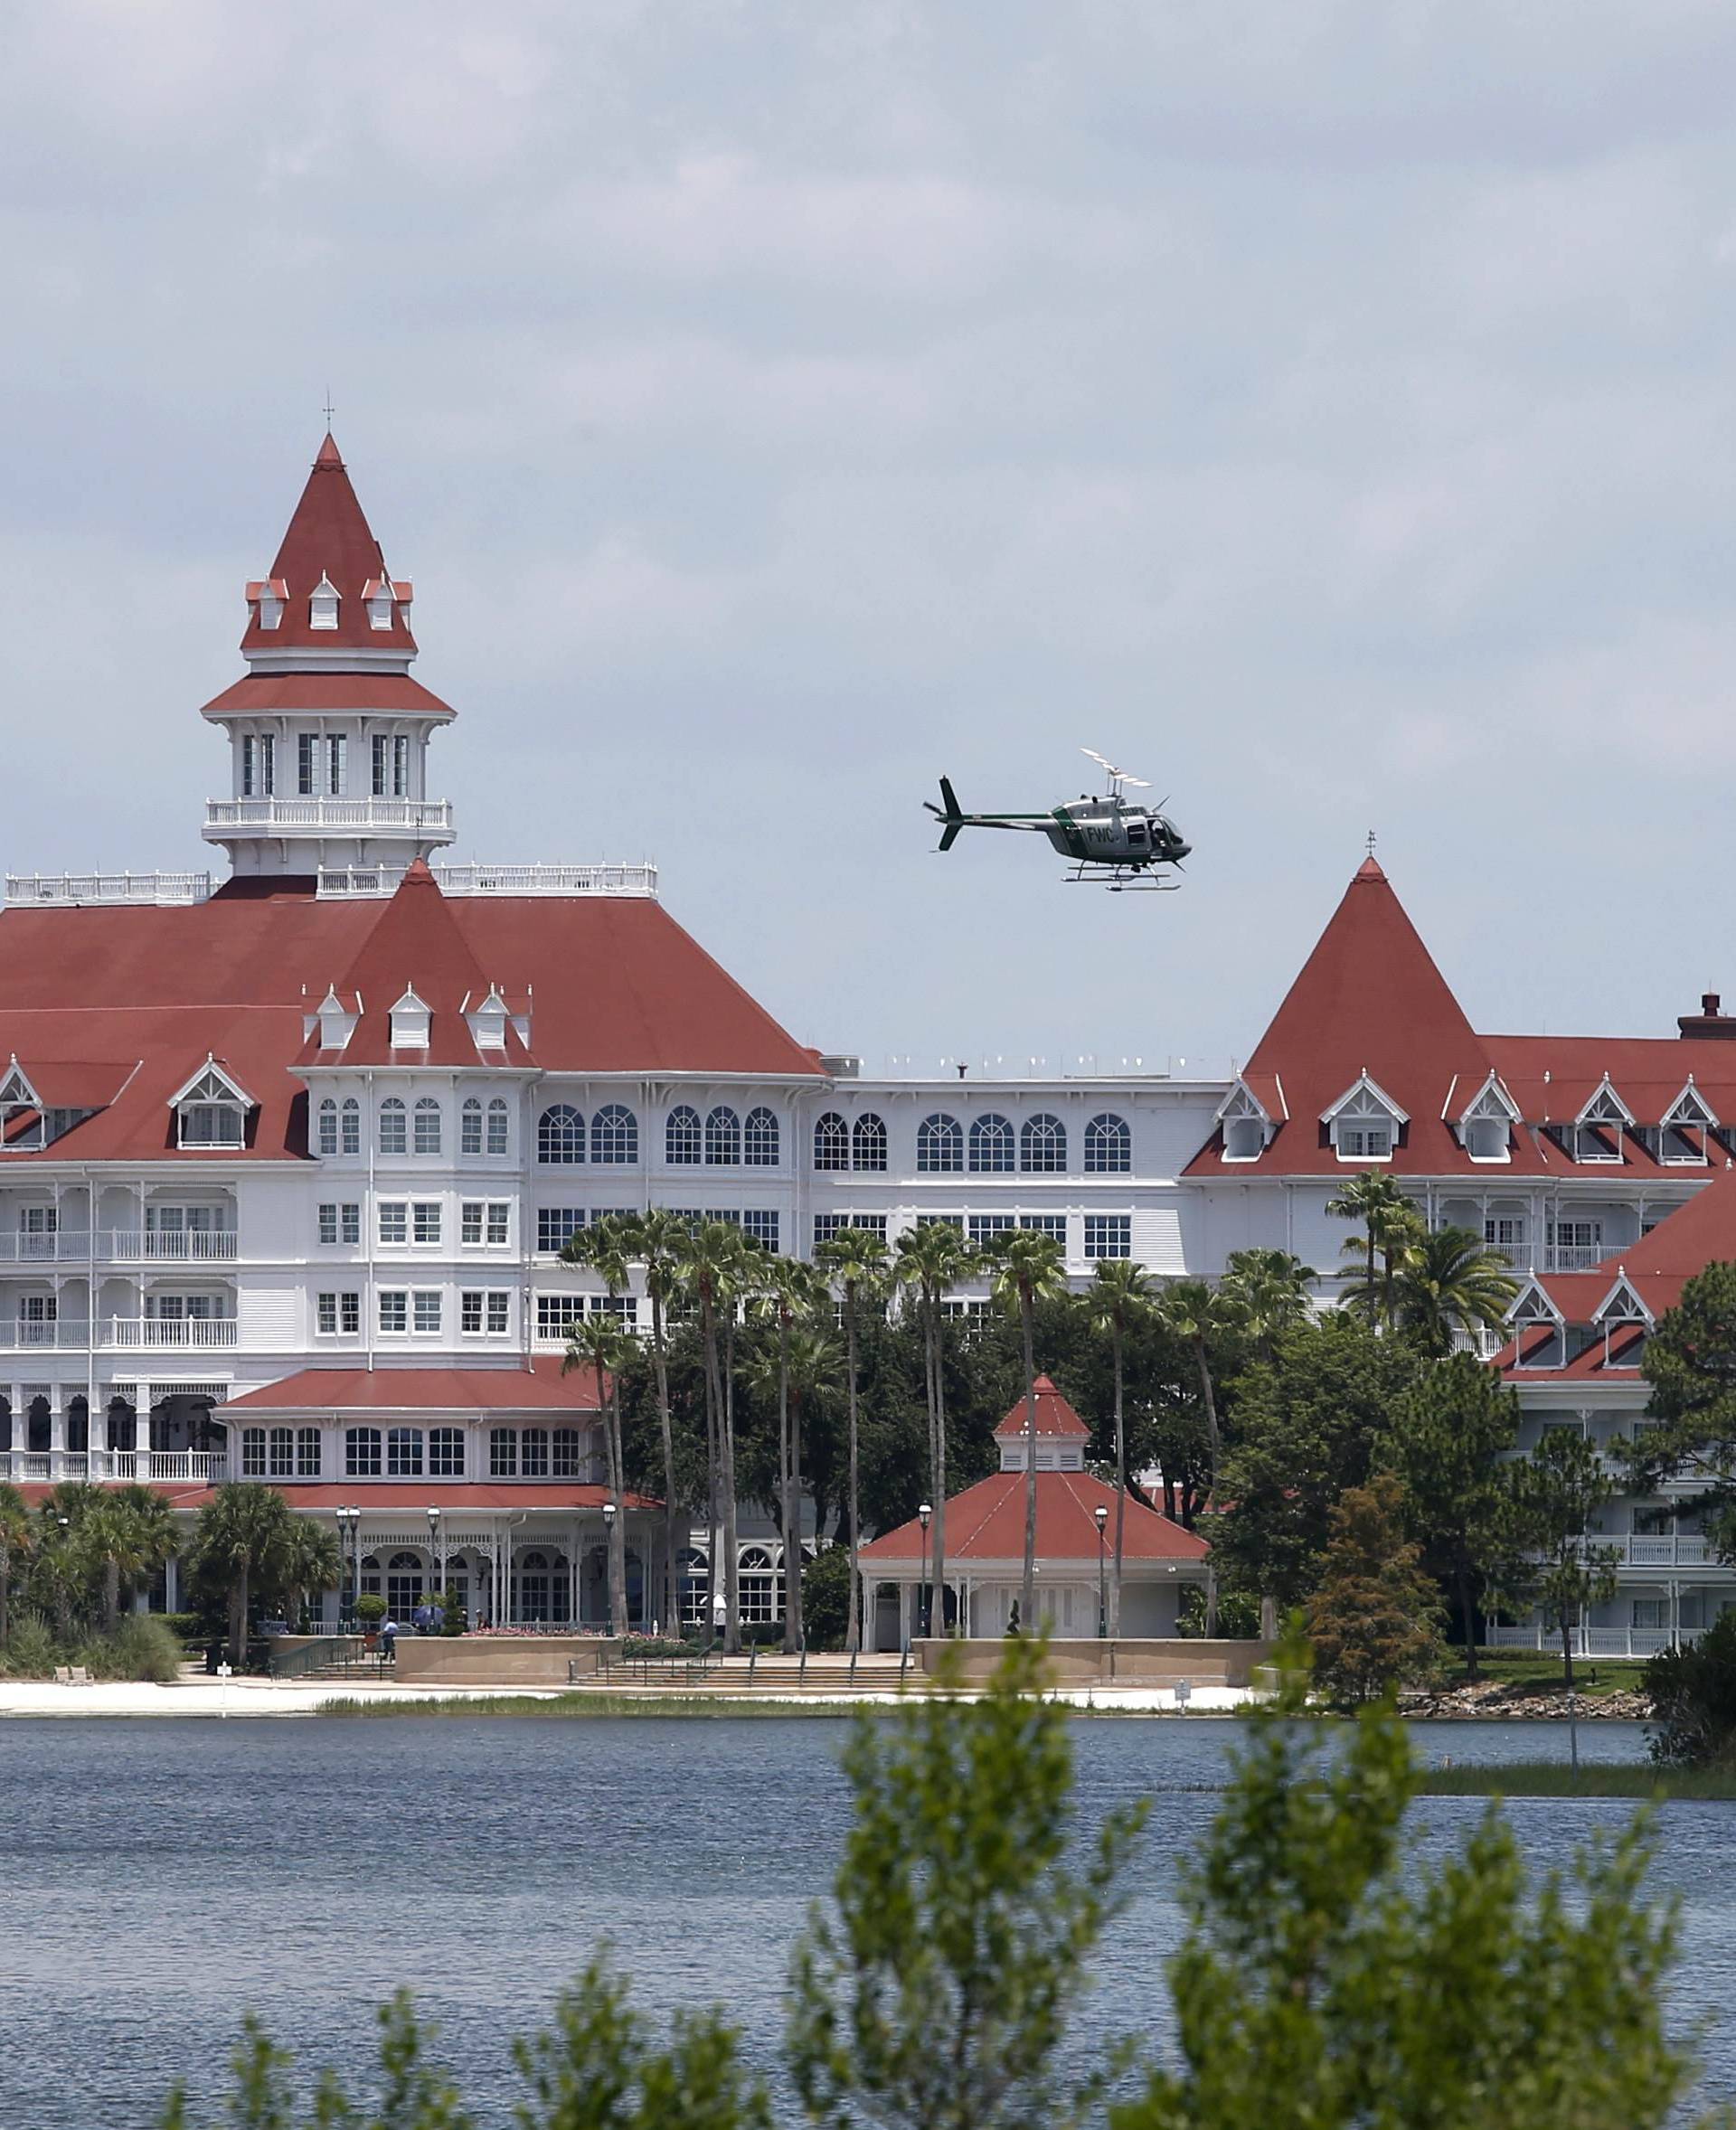 A Florida Fish and Wildlife Conservation Commission helicopter flies over lagoon at Walt Disney World resort in Orlando, Florida